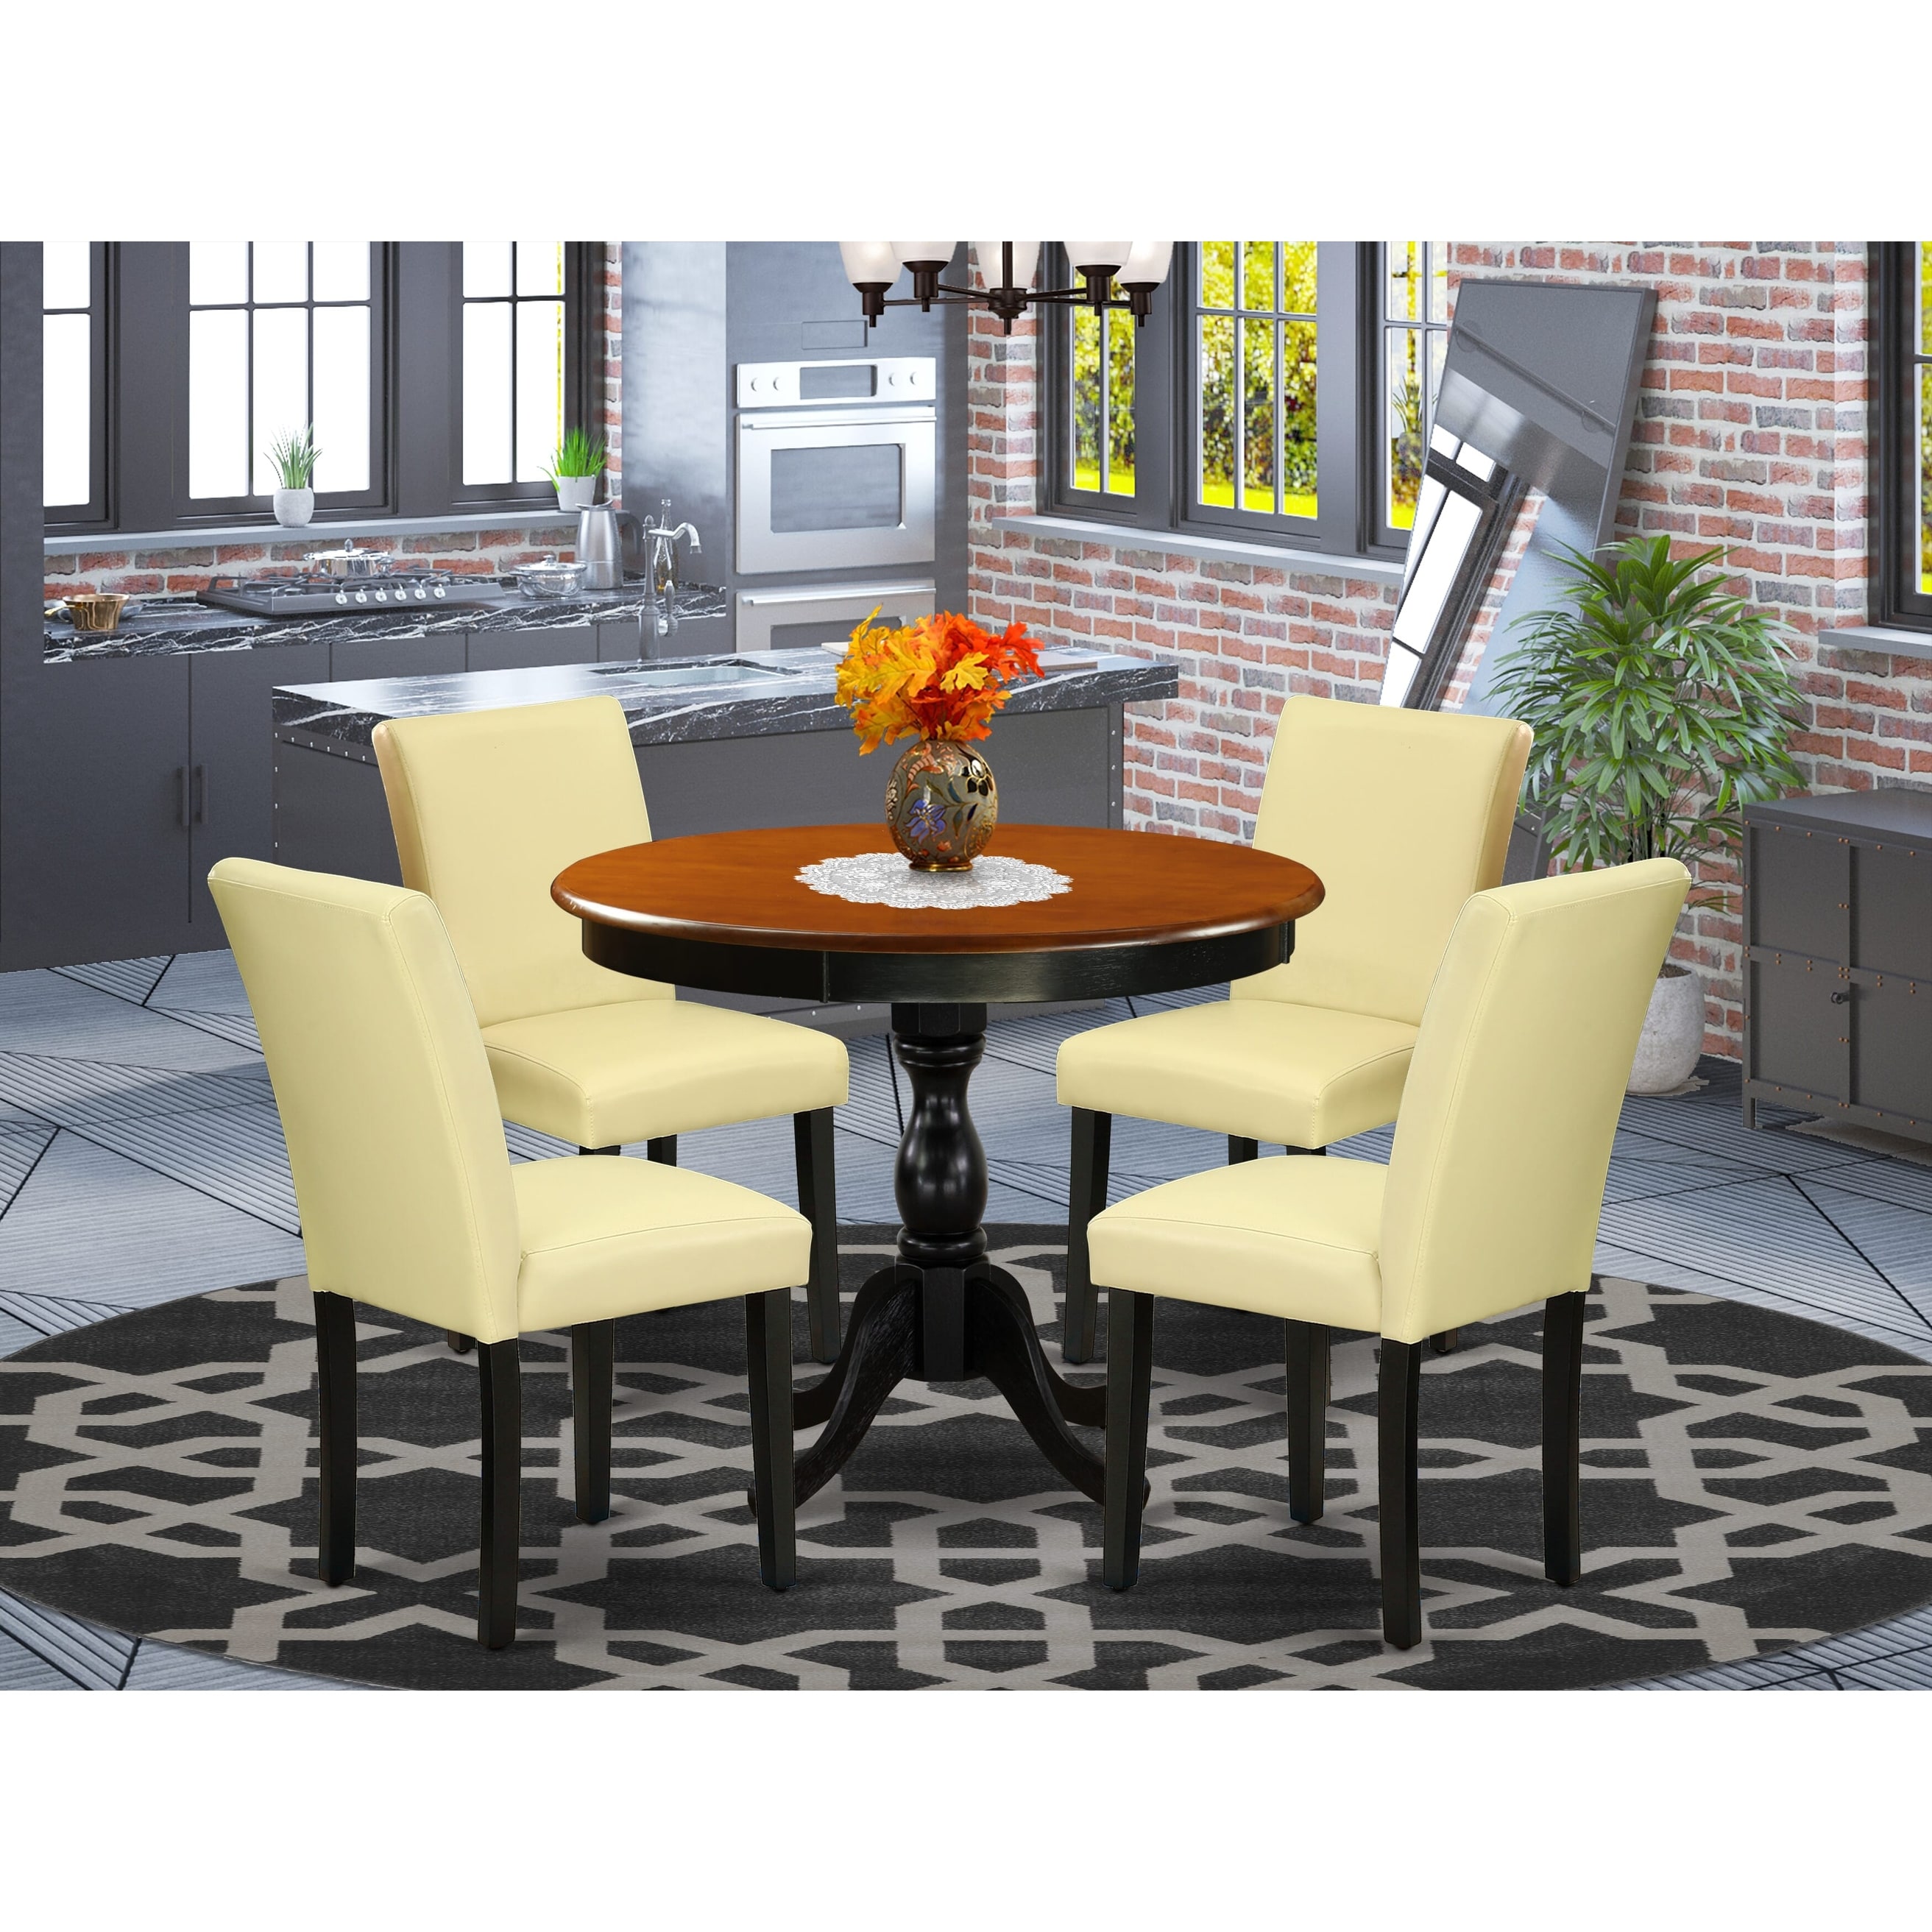 East West Furniture Kitchen Table Set- A Round Dining Table And 4 Parsons Chairs  Black and Cherry(upholstered and Pieces Options)